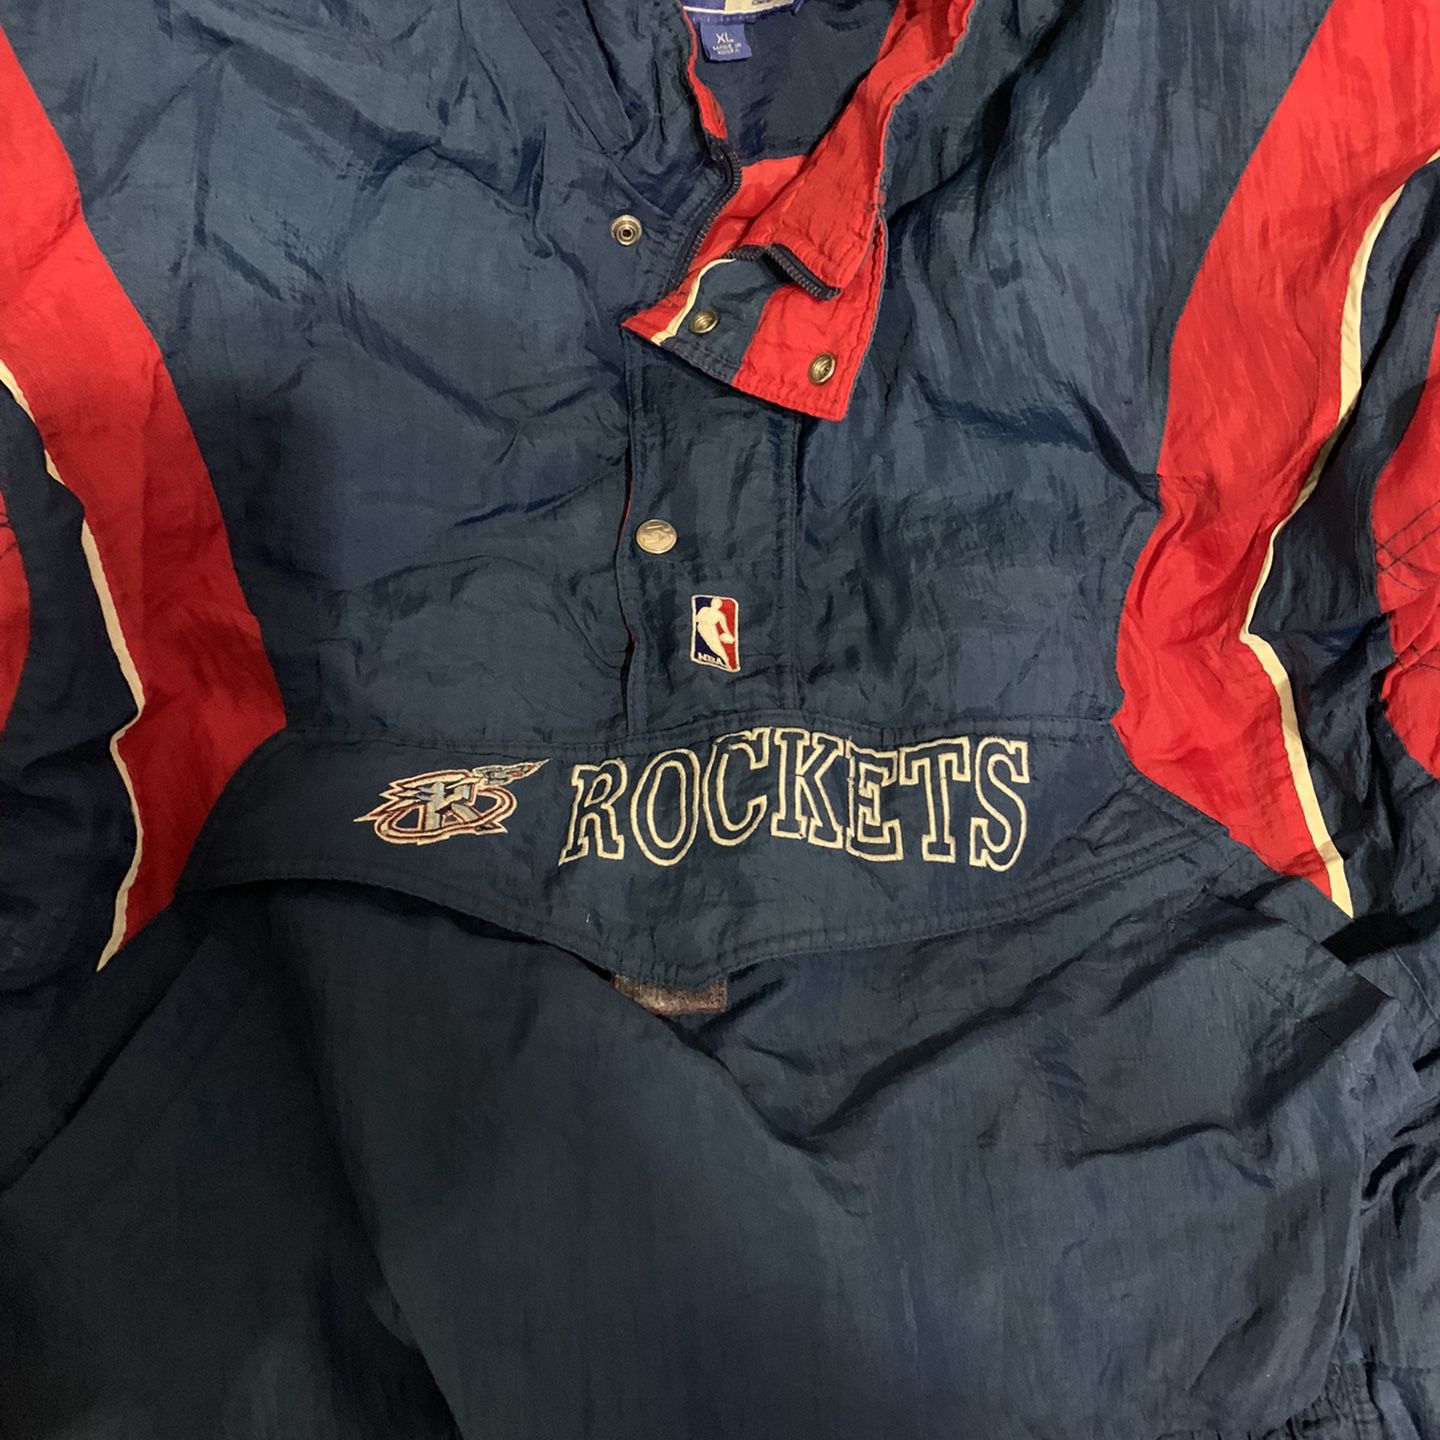 Houston Rockets Vintage 90's Puffy Basketball Jacket for Sale in Houston,  TX - OfferUp